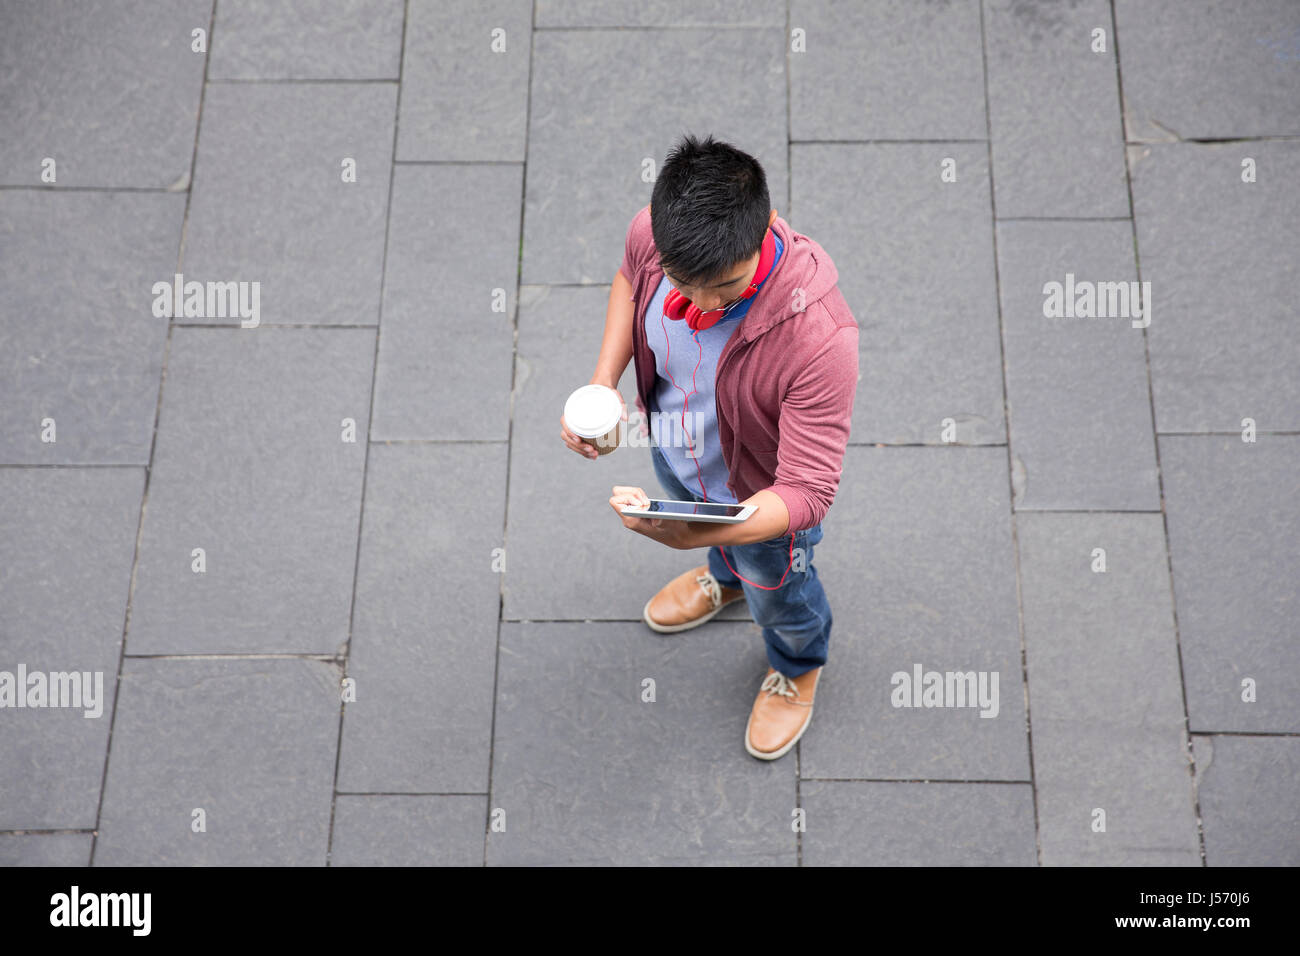 High angle view of a Chinese man standing on city street en utilisant un stylet. Banque D'Images